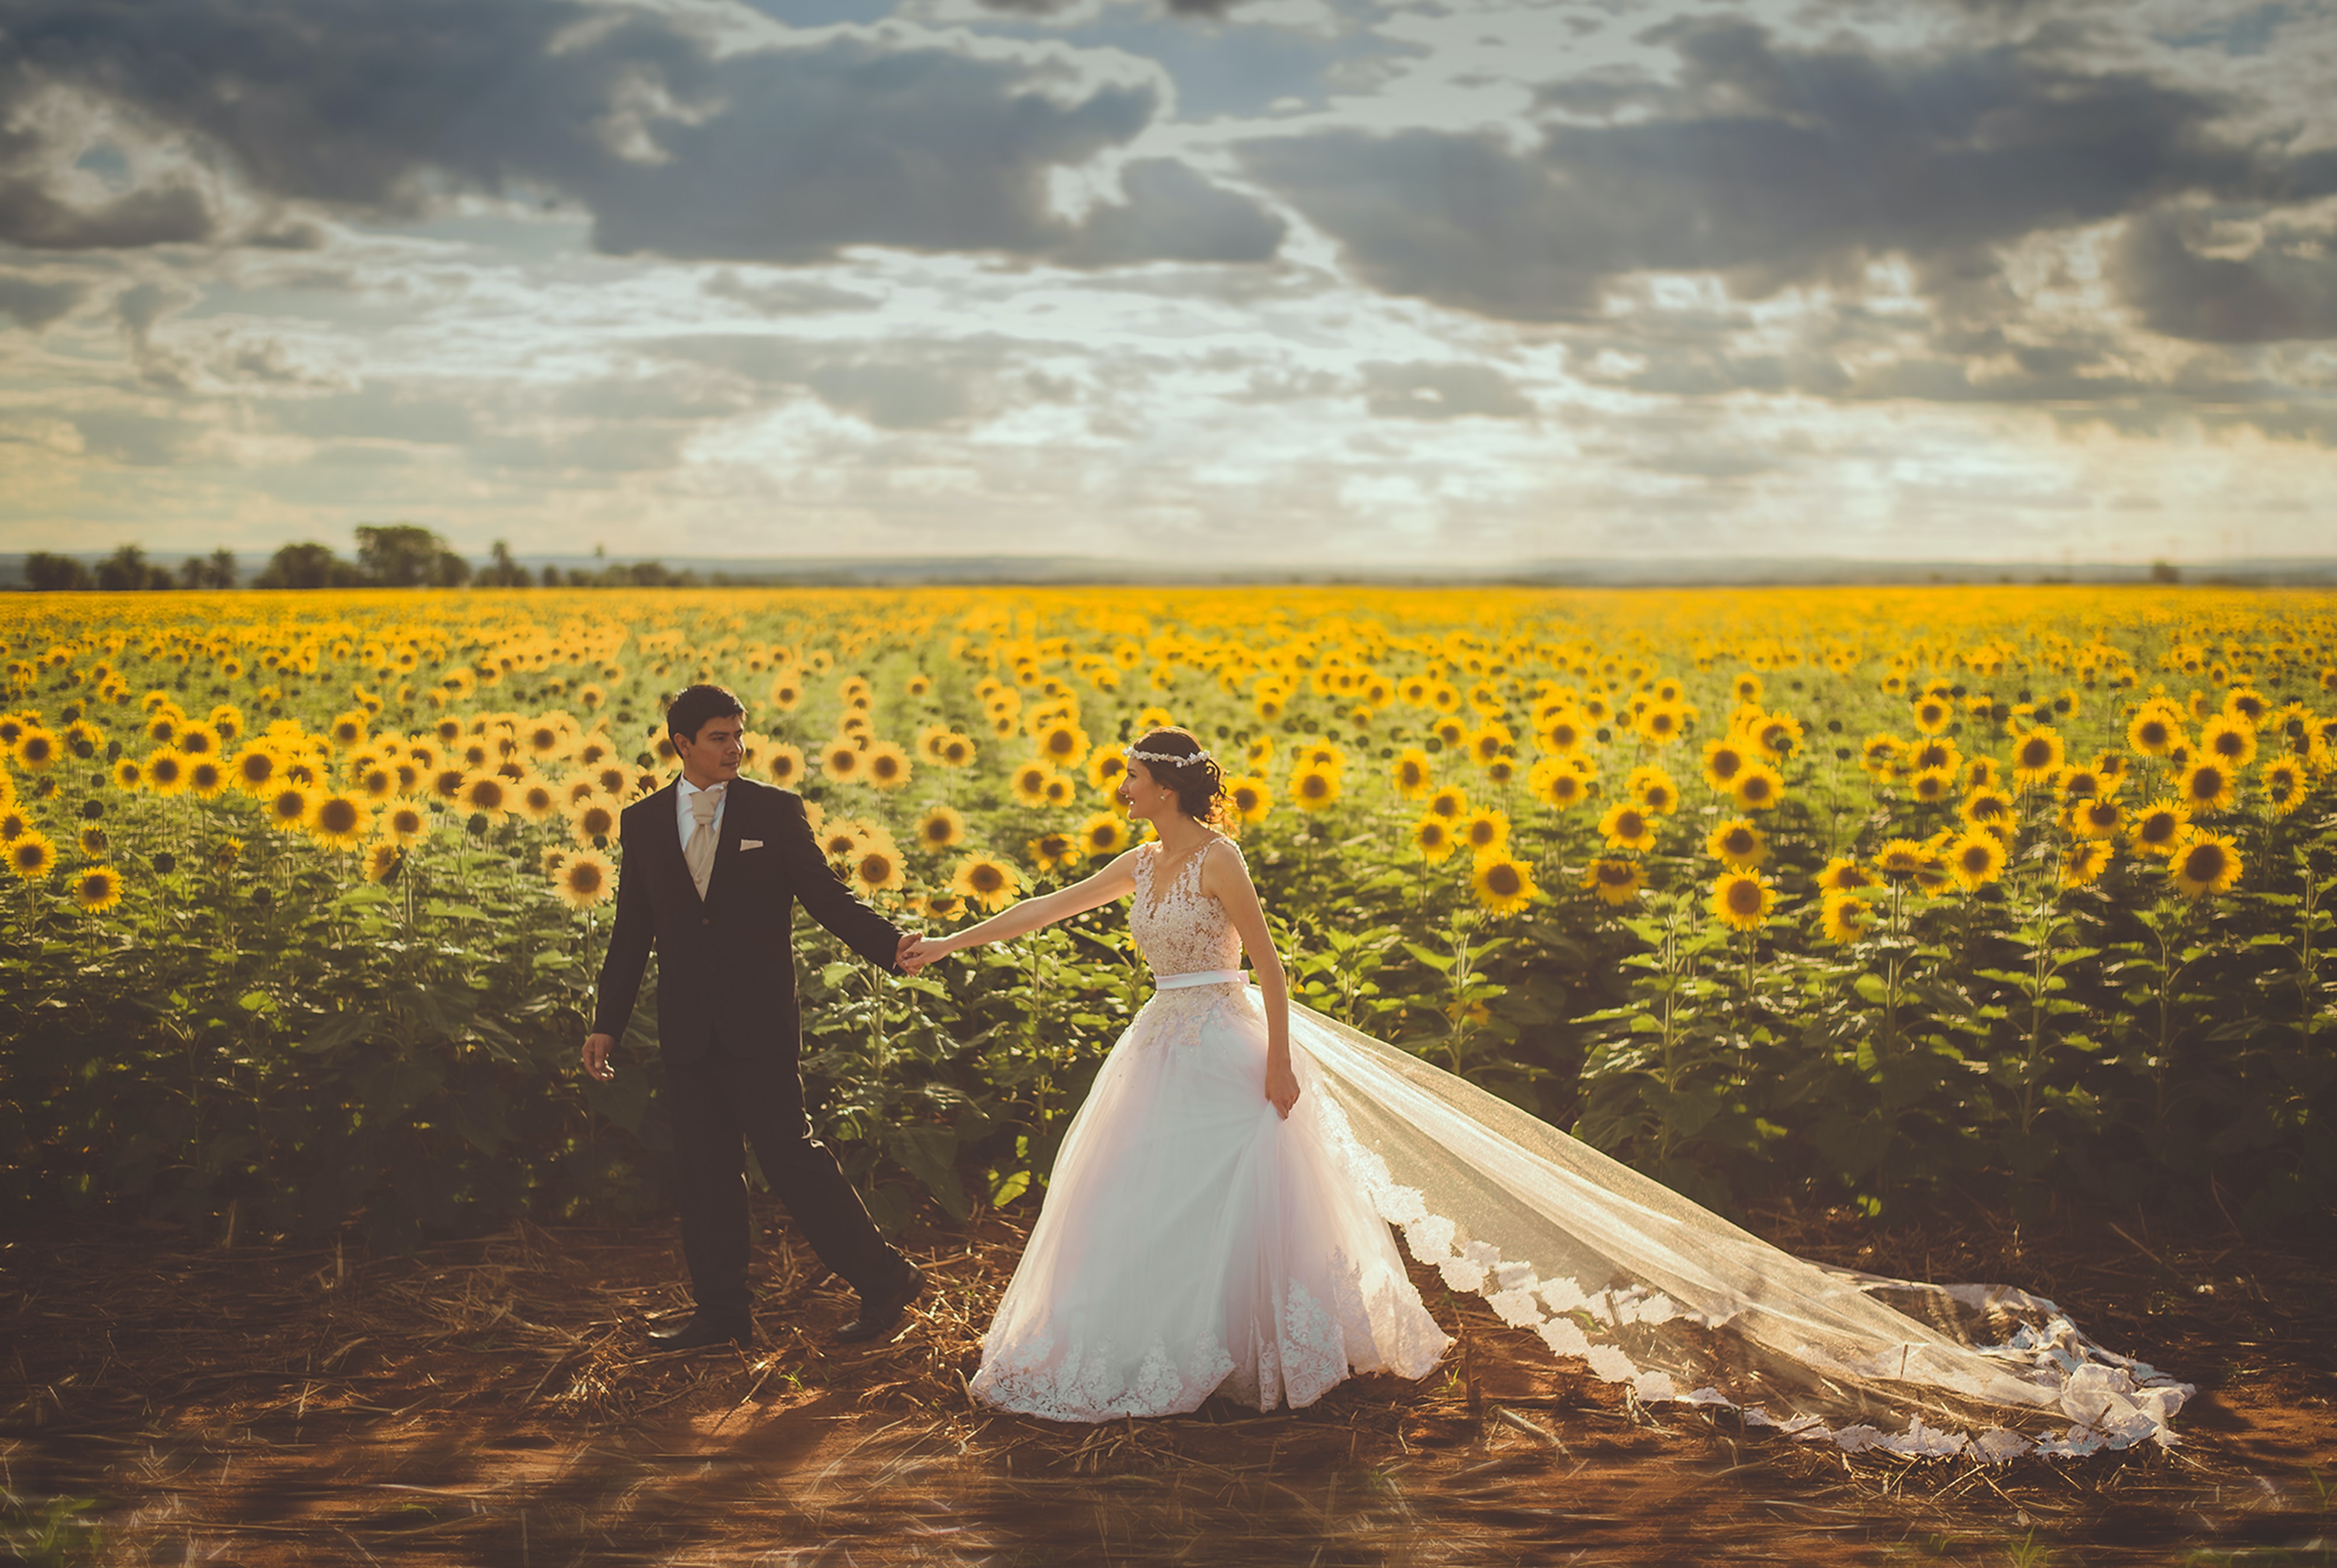 Married couple in front of sunflower field